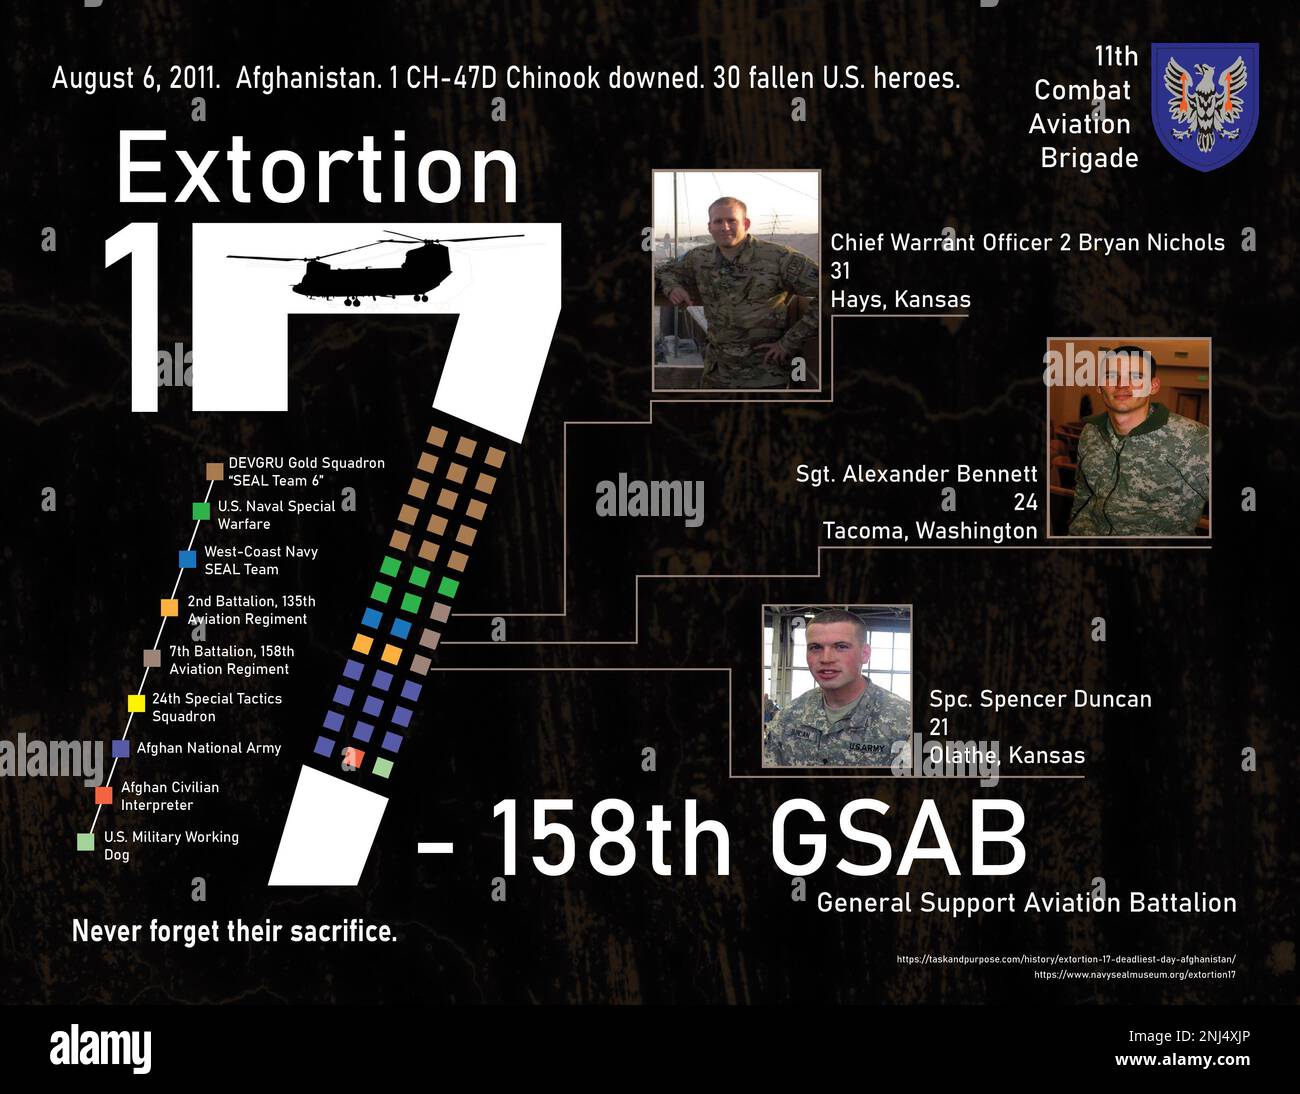 Visual graphic made with Adobe Illustrator of the 11th anniversary remembering the fallen U.S. service members of Extortion 17, August 5, 2022. Extortion 17 was the callsign of the CH-47D Chinook helicopter that crashed after being struck by a rocket propelled grenade on August 6, 2011, killing all 30 U.S. service members inside the aircraft, including a pilot and flight crew with 7th Battalion, 158th Aviation Regiment (General Support Aviation Battalion). The fallen 7-158th GSAB Soldiers are U.S. Army Chief Warrant Officer 2 Bryan Nichols of Hays, Kansas, U.S. Army Sgt. Alexander Bennett of T Stock Photo